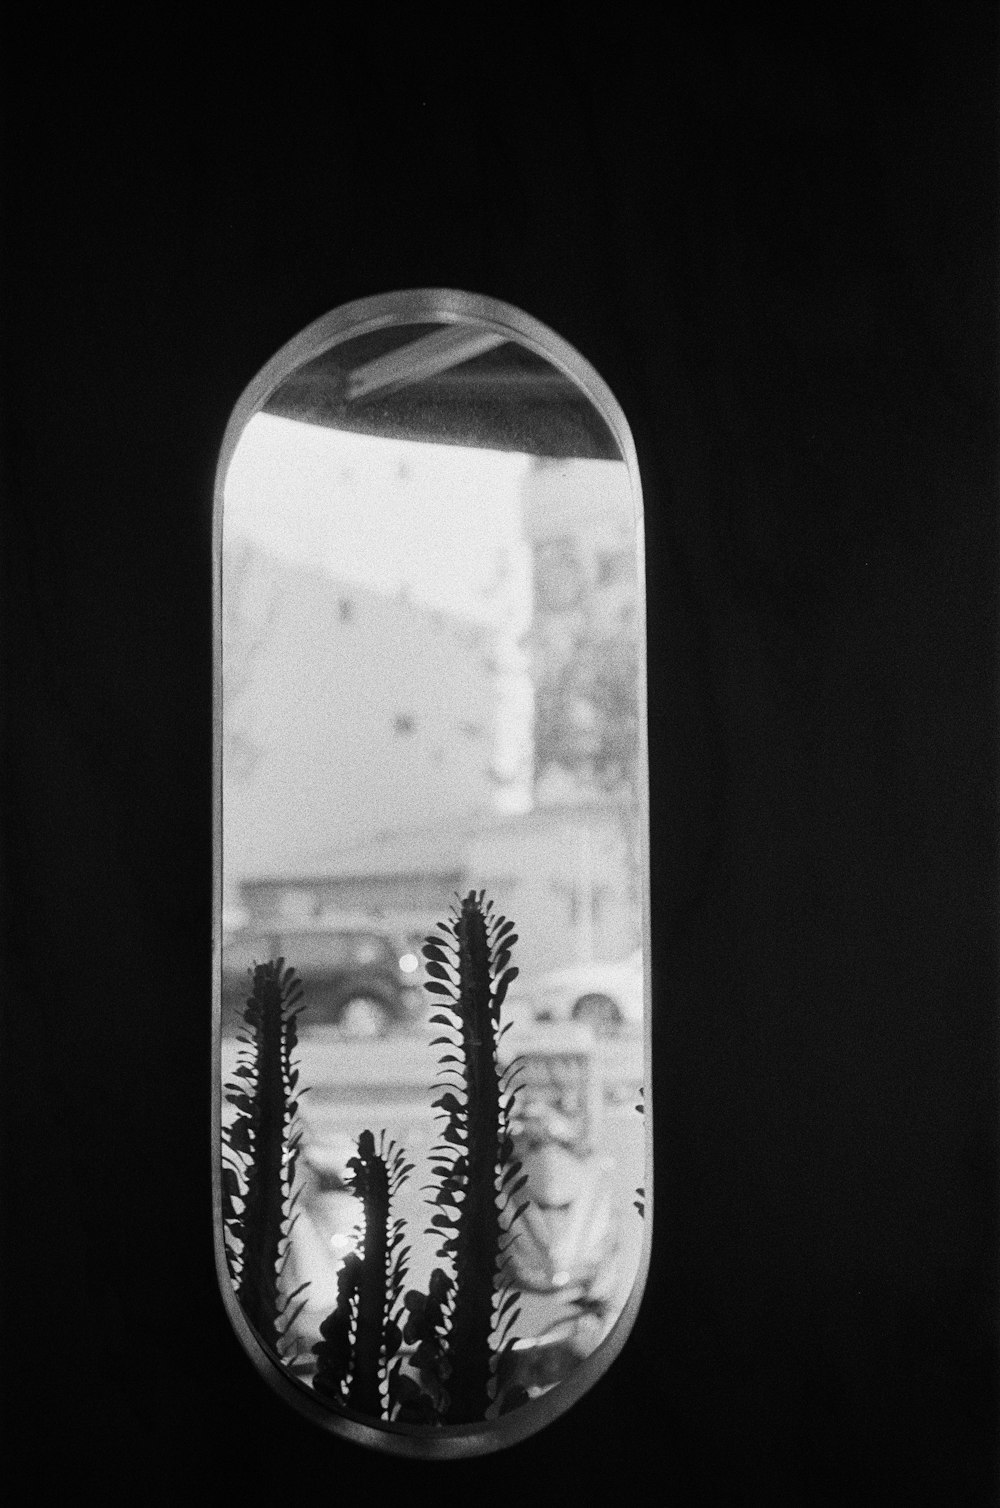 a black and white photo of a window with a plant in it